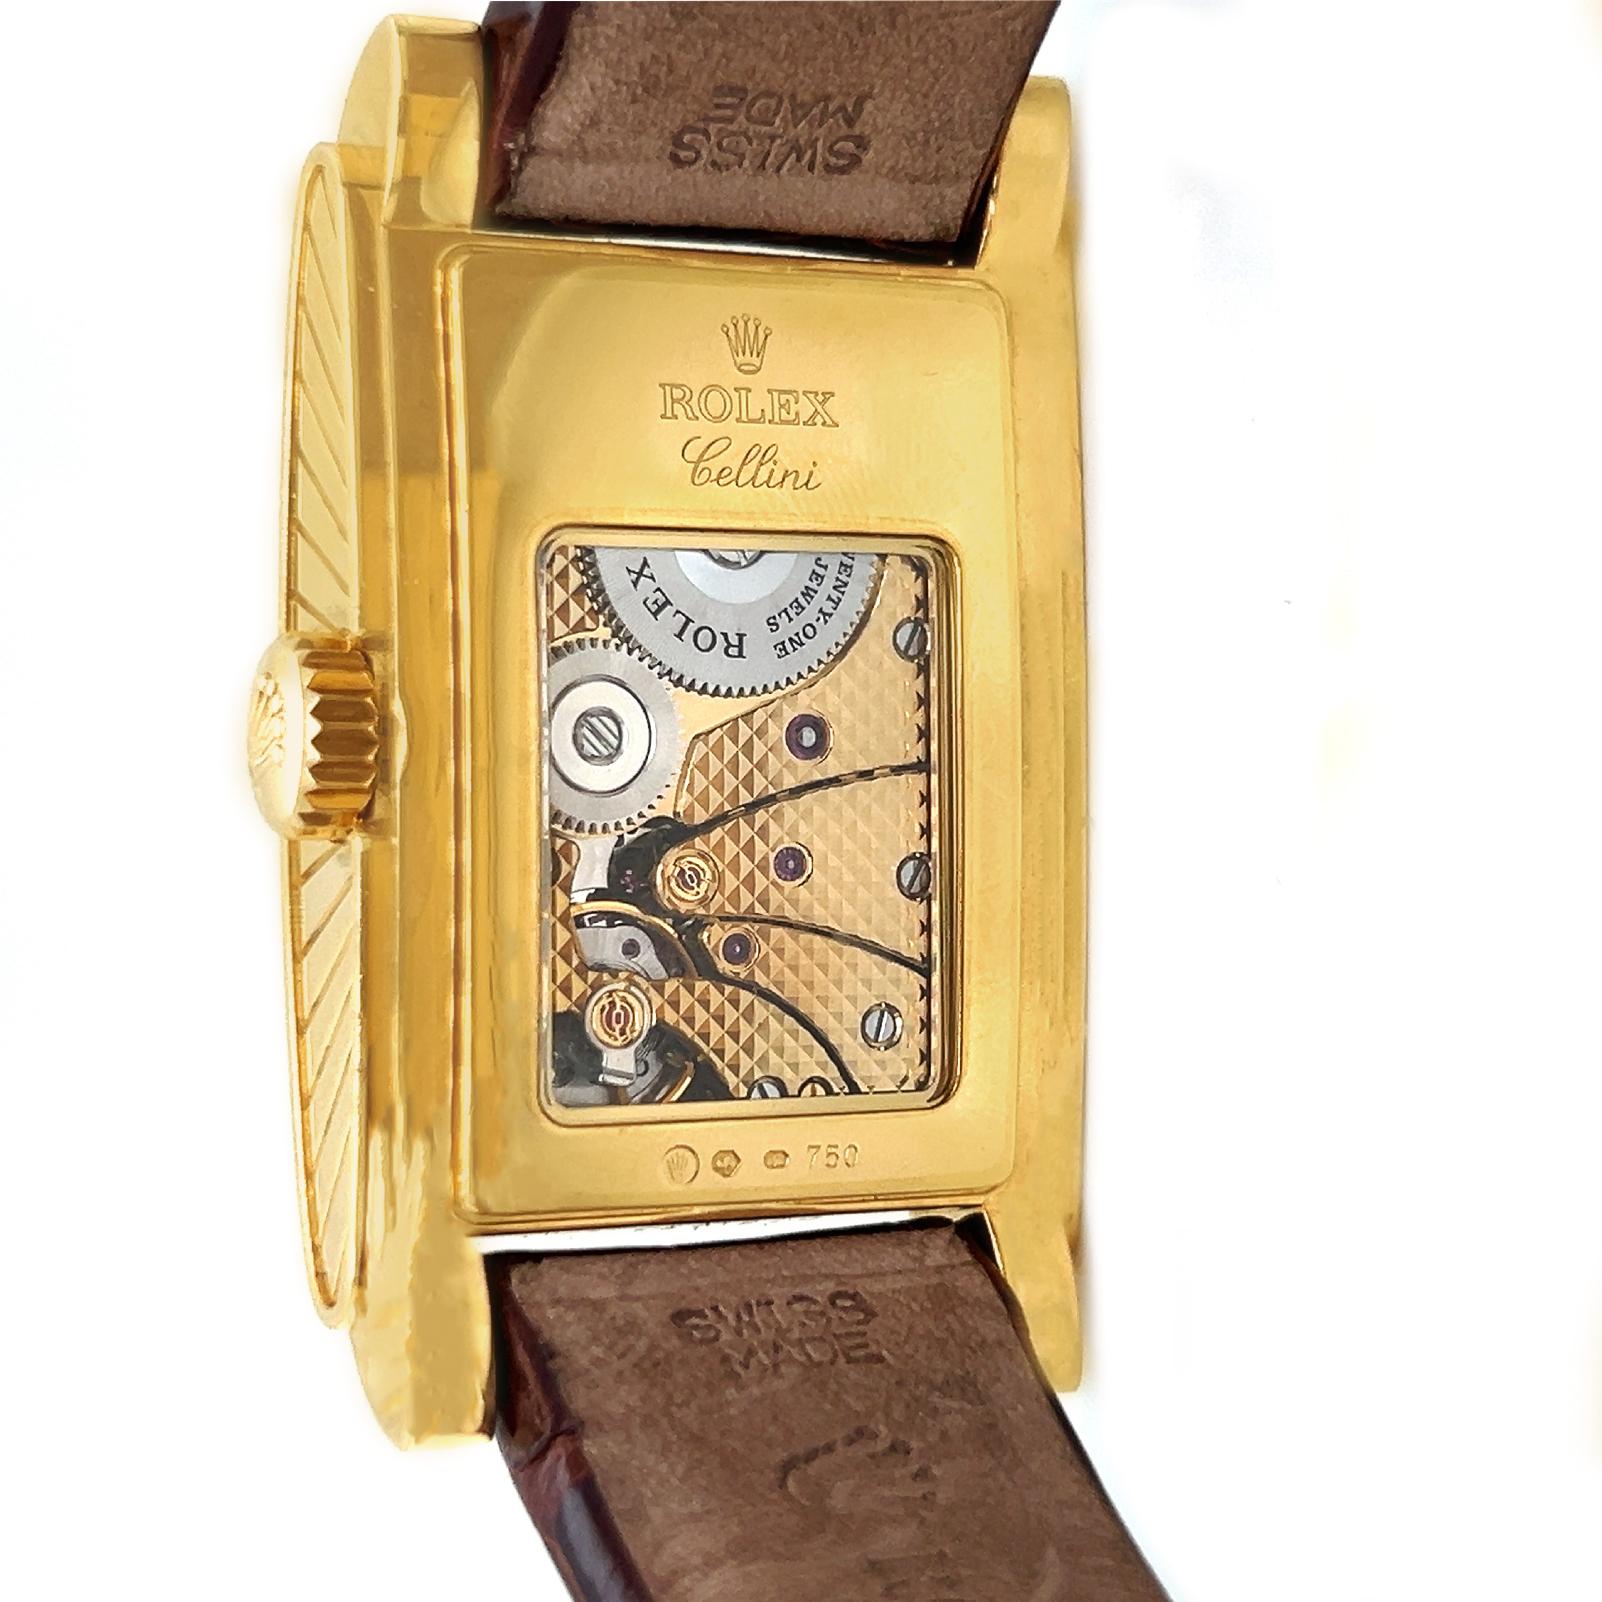 Rolex Prince Cellini Unisex Mens Womens 18K Yellow Gold Watch 5440/8  In Excellent Condition For Sale In Los Angeles, CA